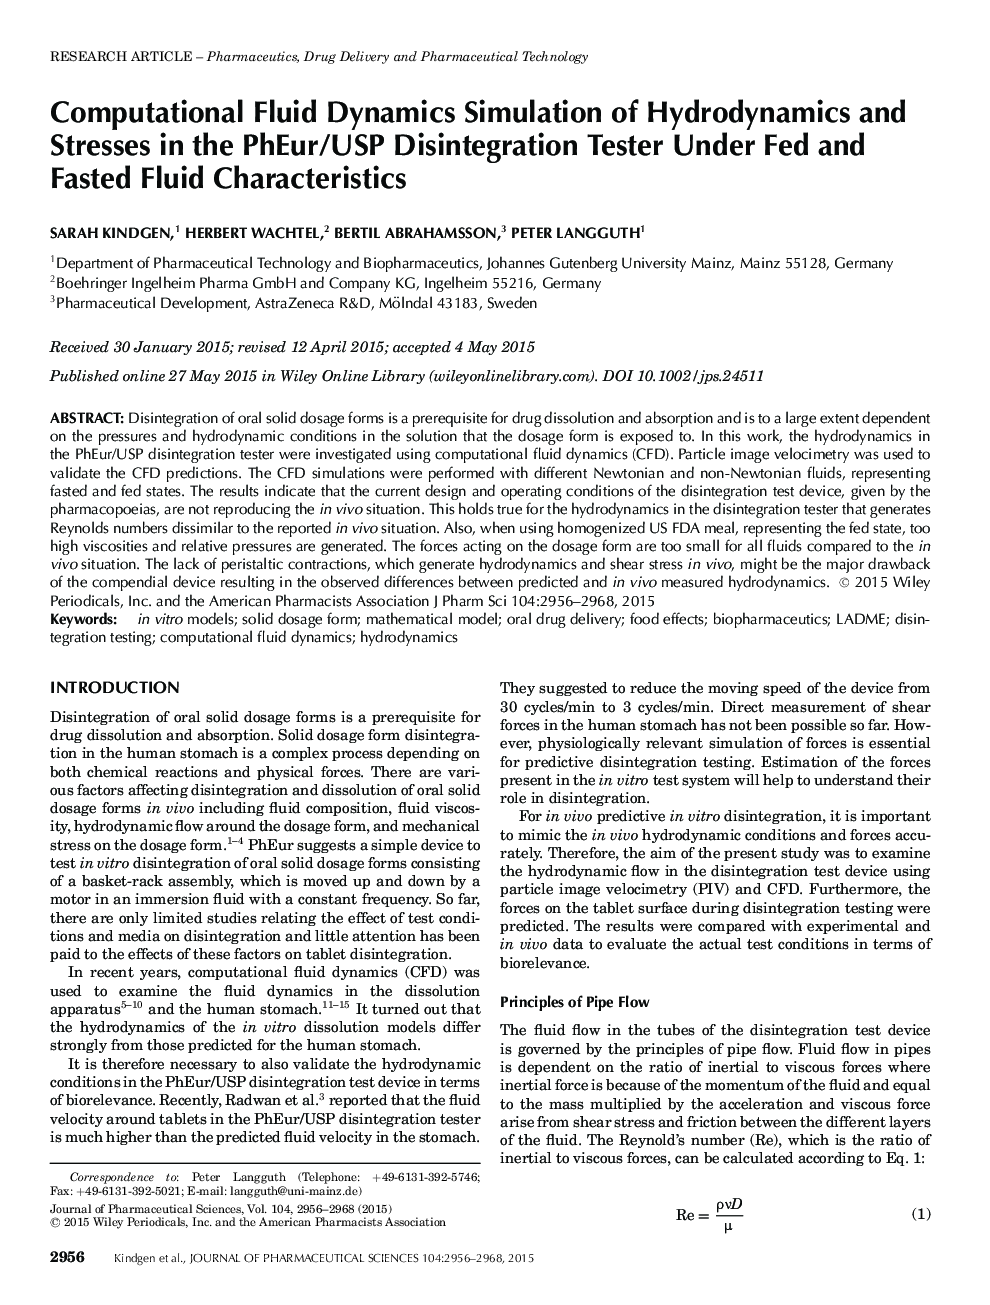 Computational Fluid Dynamics Simulation of Hydrodynamics and Stresses in the PhEur/USP Disintegration Tester Under Fed and Fasted Fluid Characteristics